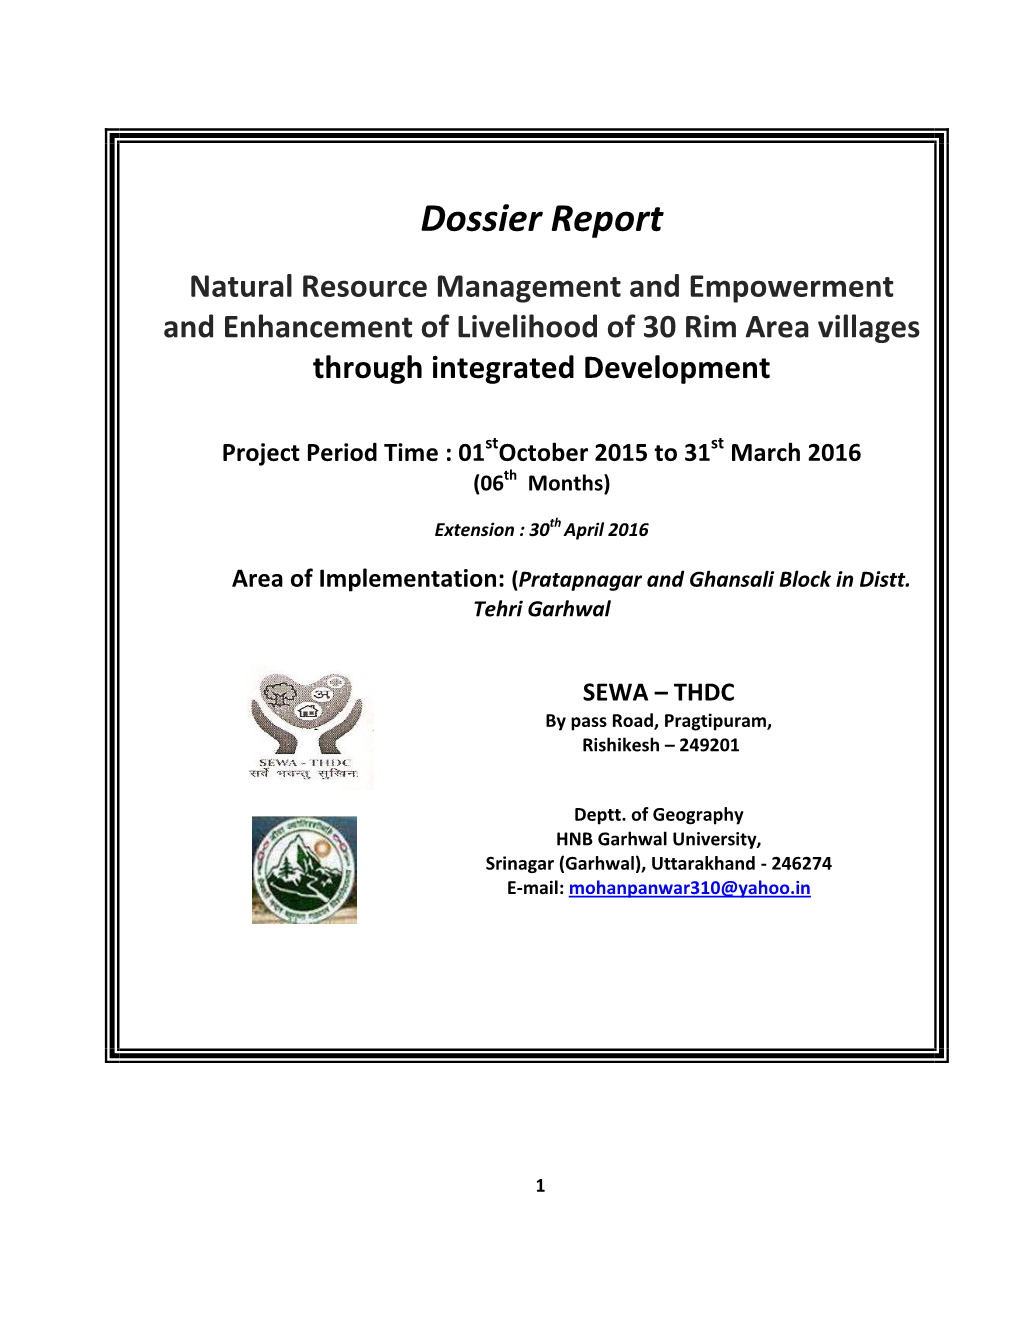 Dossier Report Natural Resource Management and Empowerment and Enhancement of Livelihood of 30 Rim Area Villages Through Integrated Development